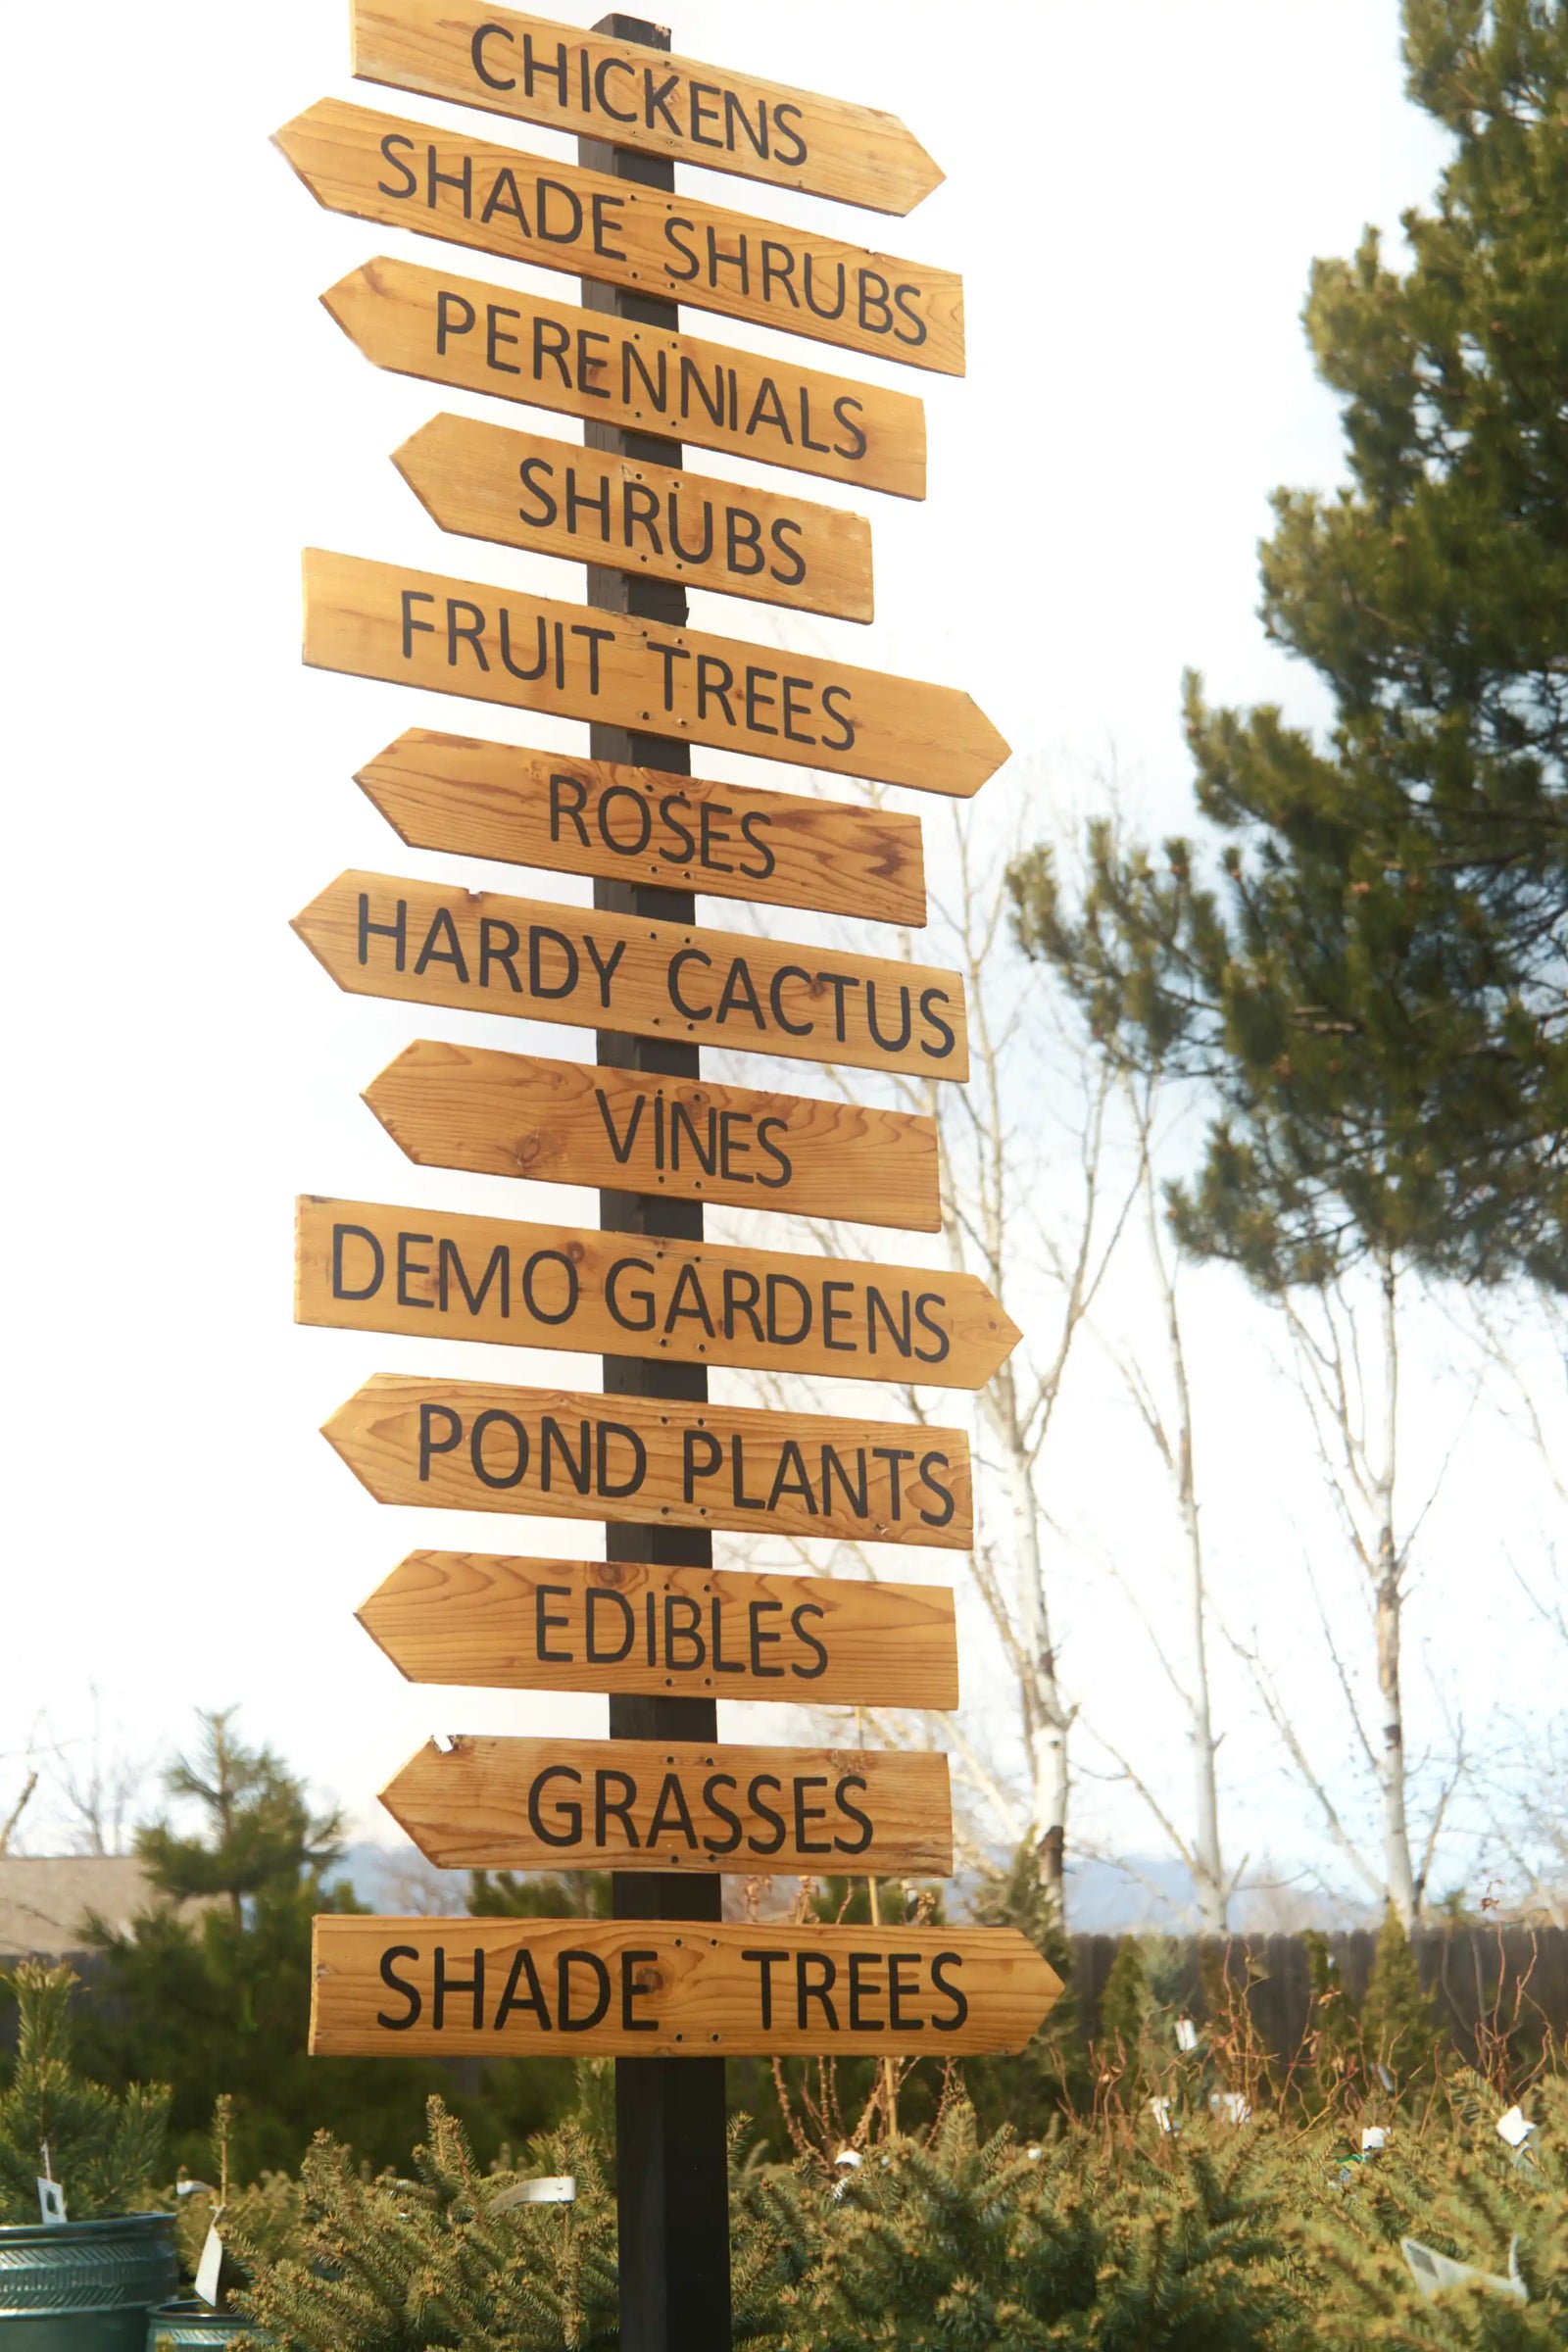 A photograph of various signs that point to sections of Phelan Gardens such as Perennials, Vines, Grasses and more